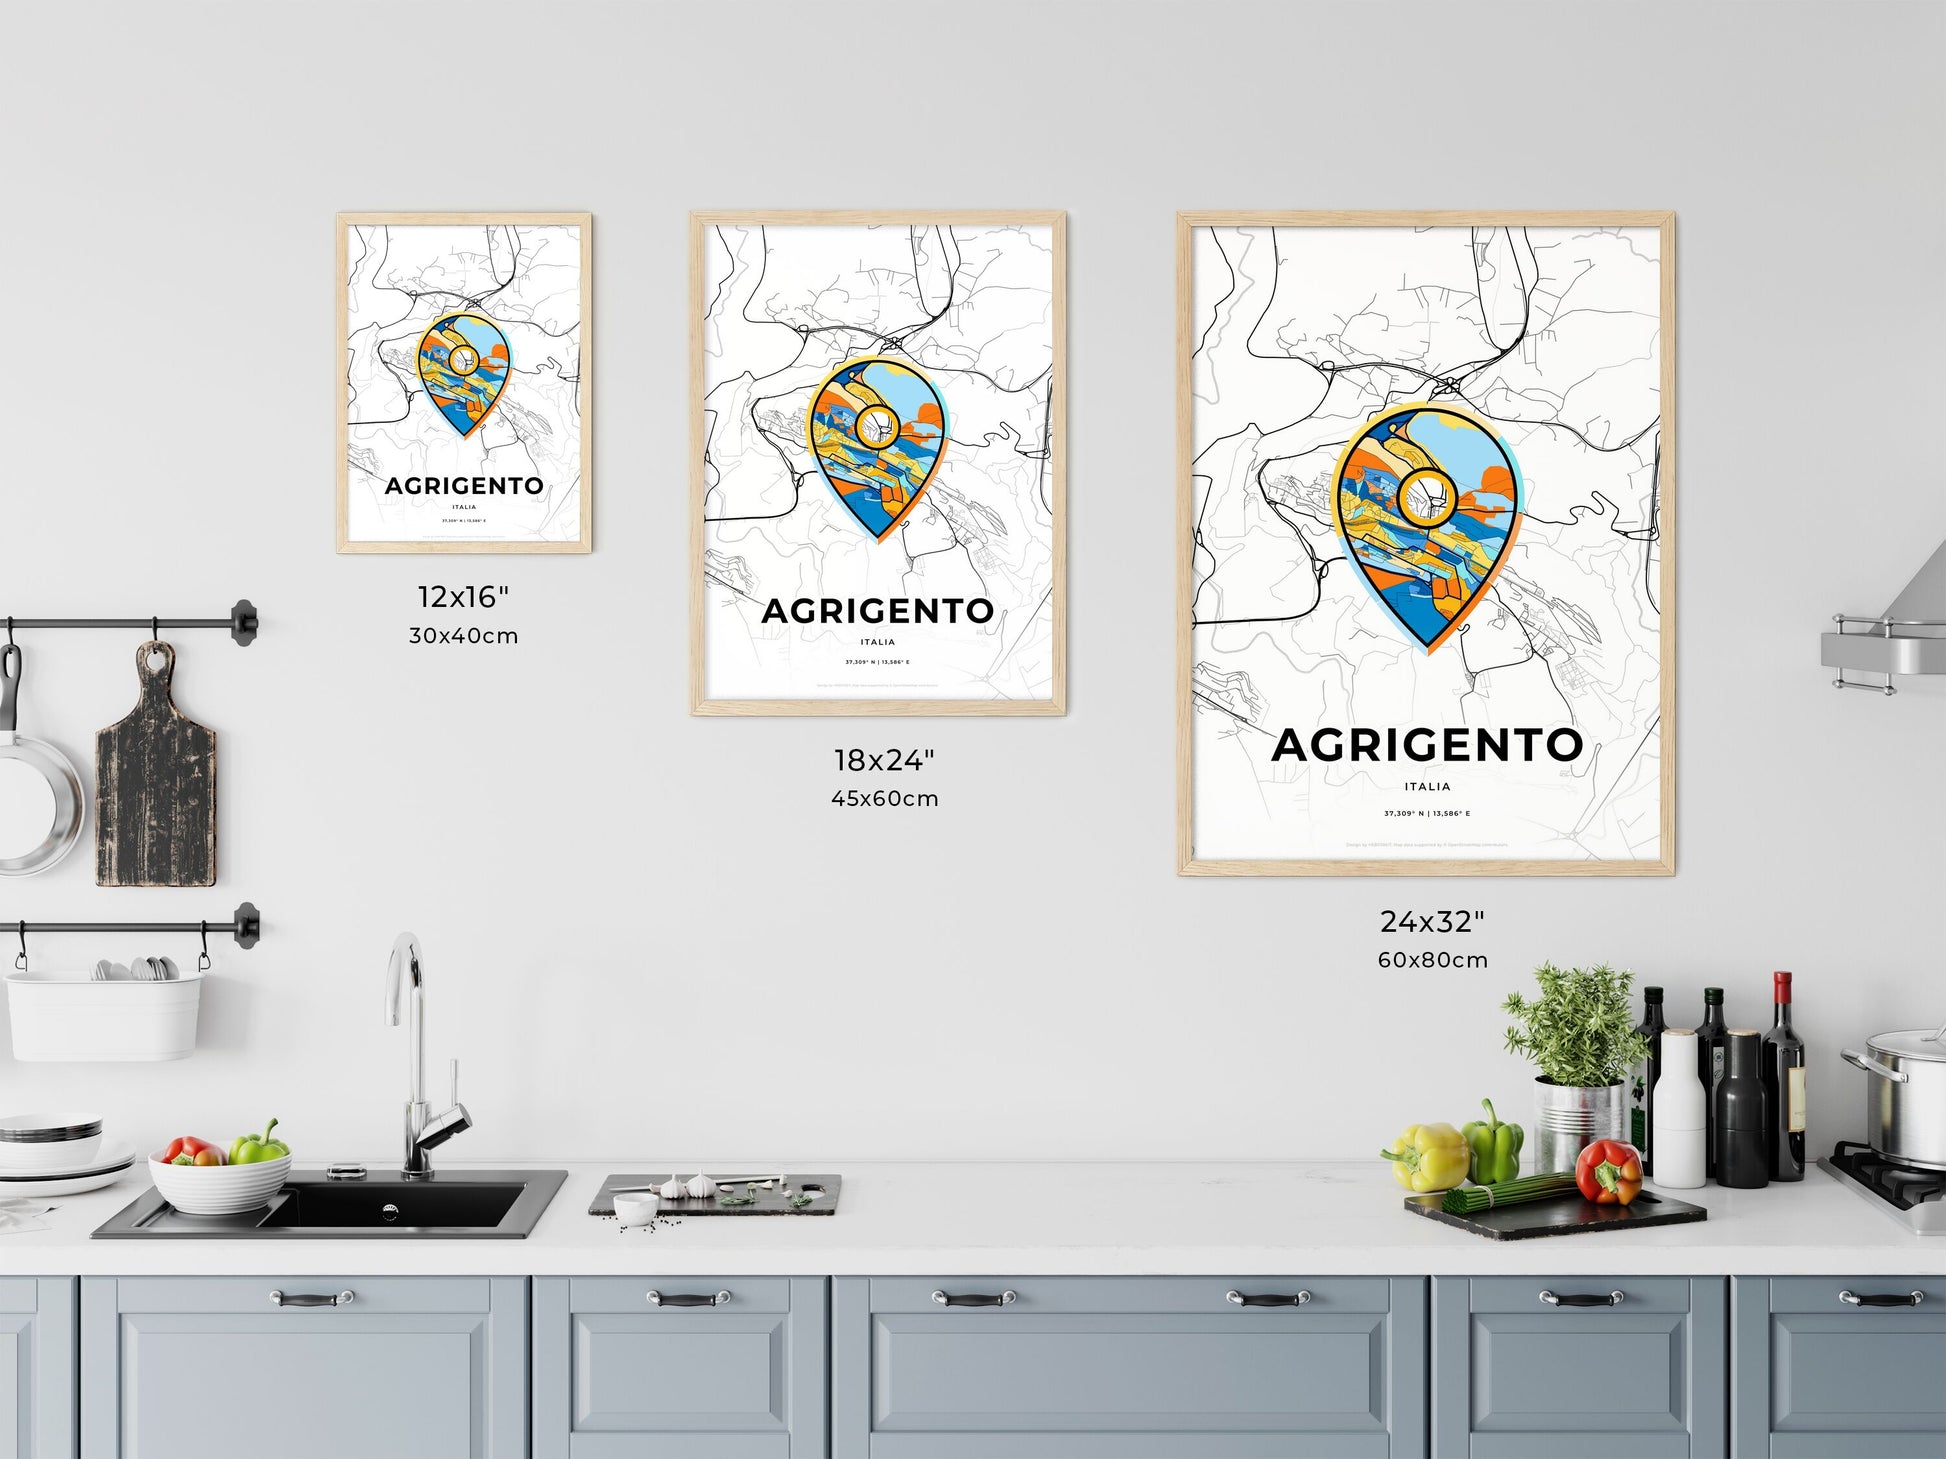 AGRIGENTO ITALY minimal art map with a colorful icon. Where it all began, Couple map gift.